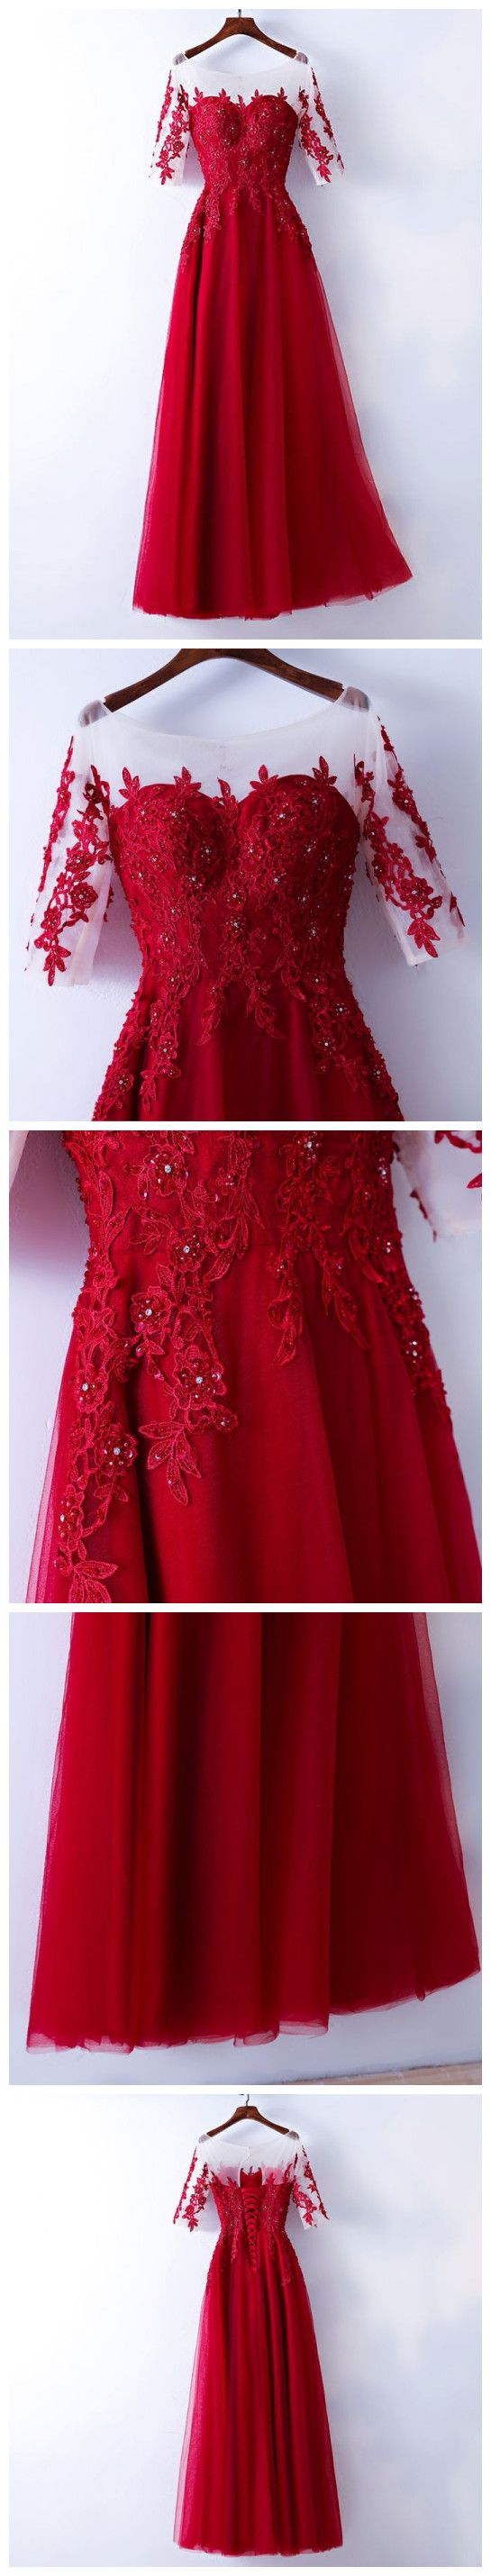 Elegant Tulle Lace Long Prom Dress, Red Lace Evening Dress,pd14332